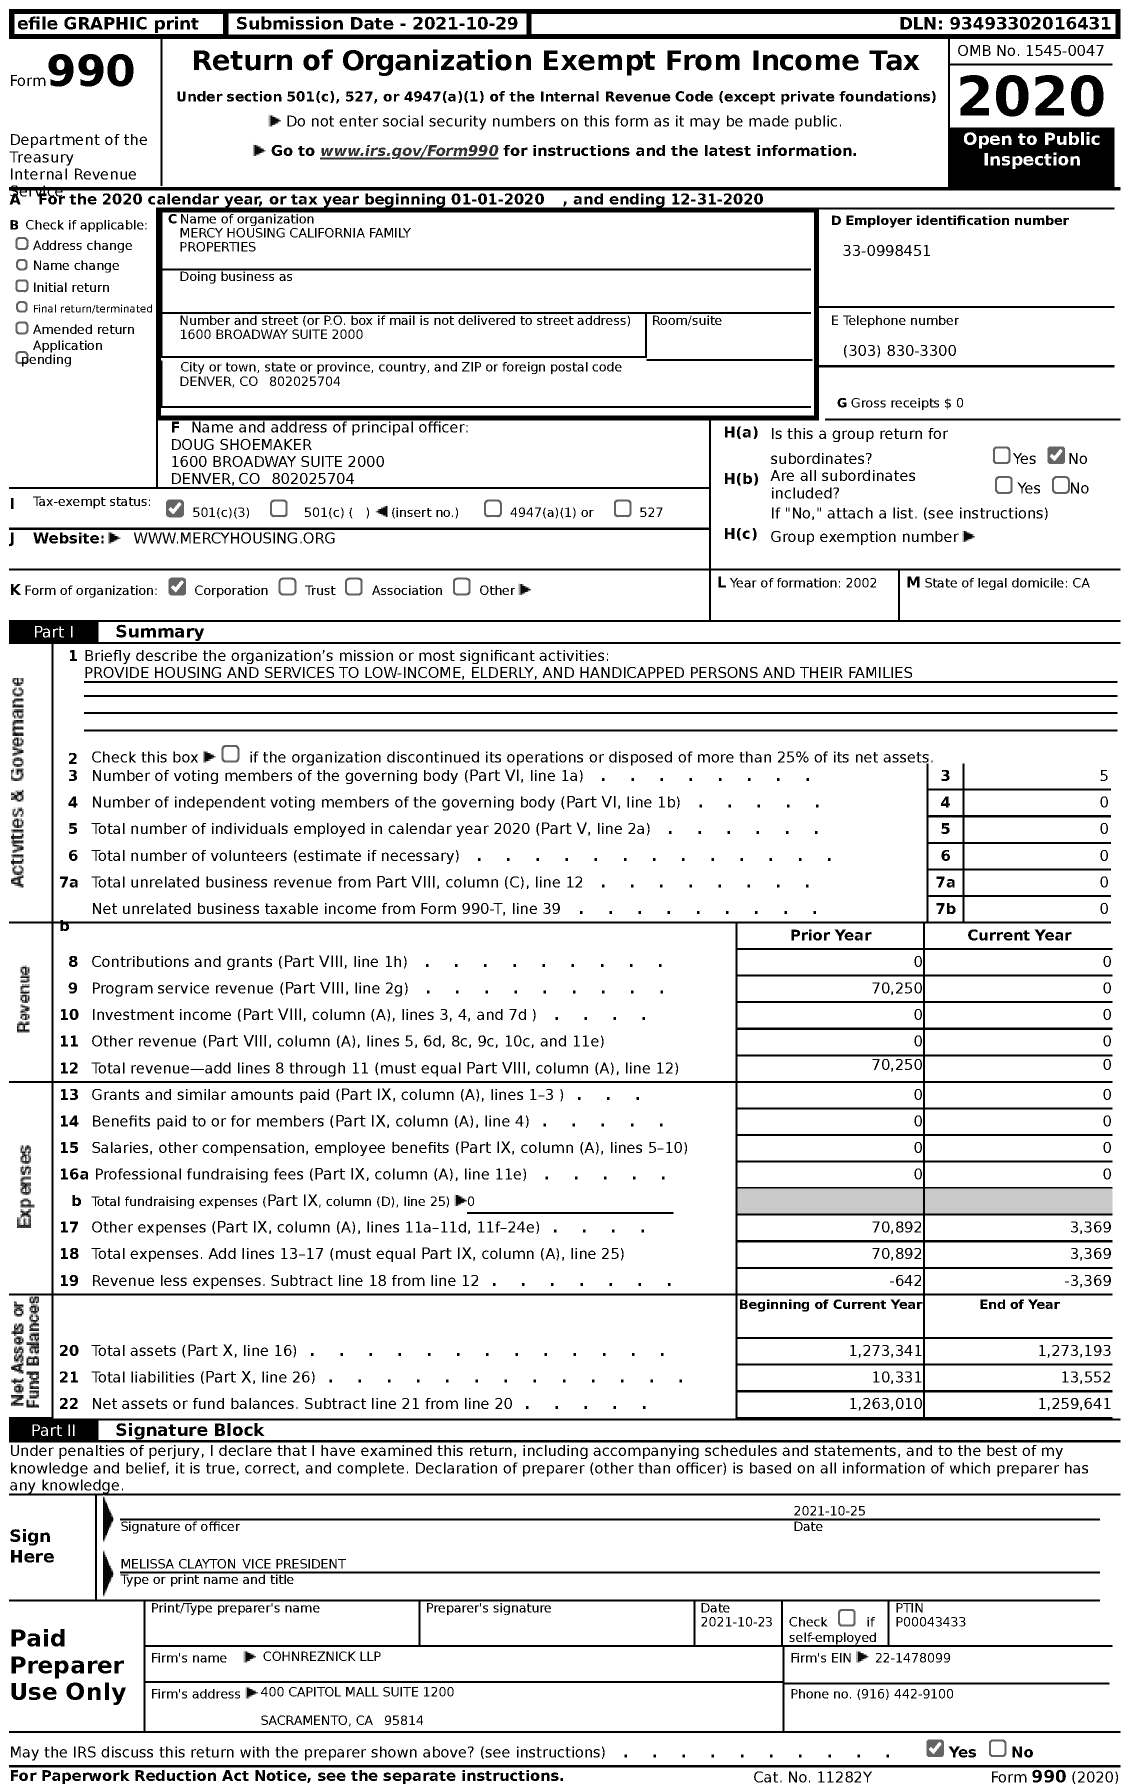 Image of first page of 2020 Form 990 for Mercy Housing California Family Properties